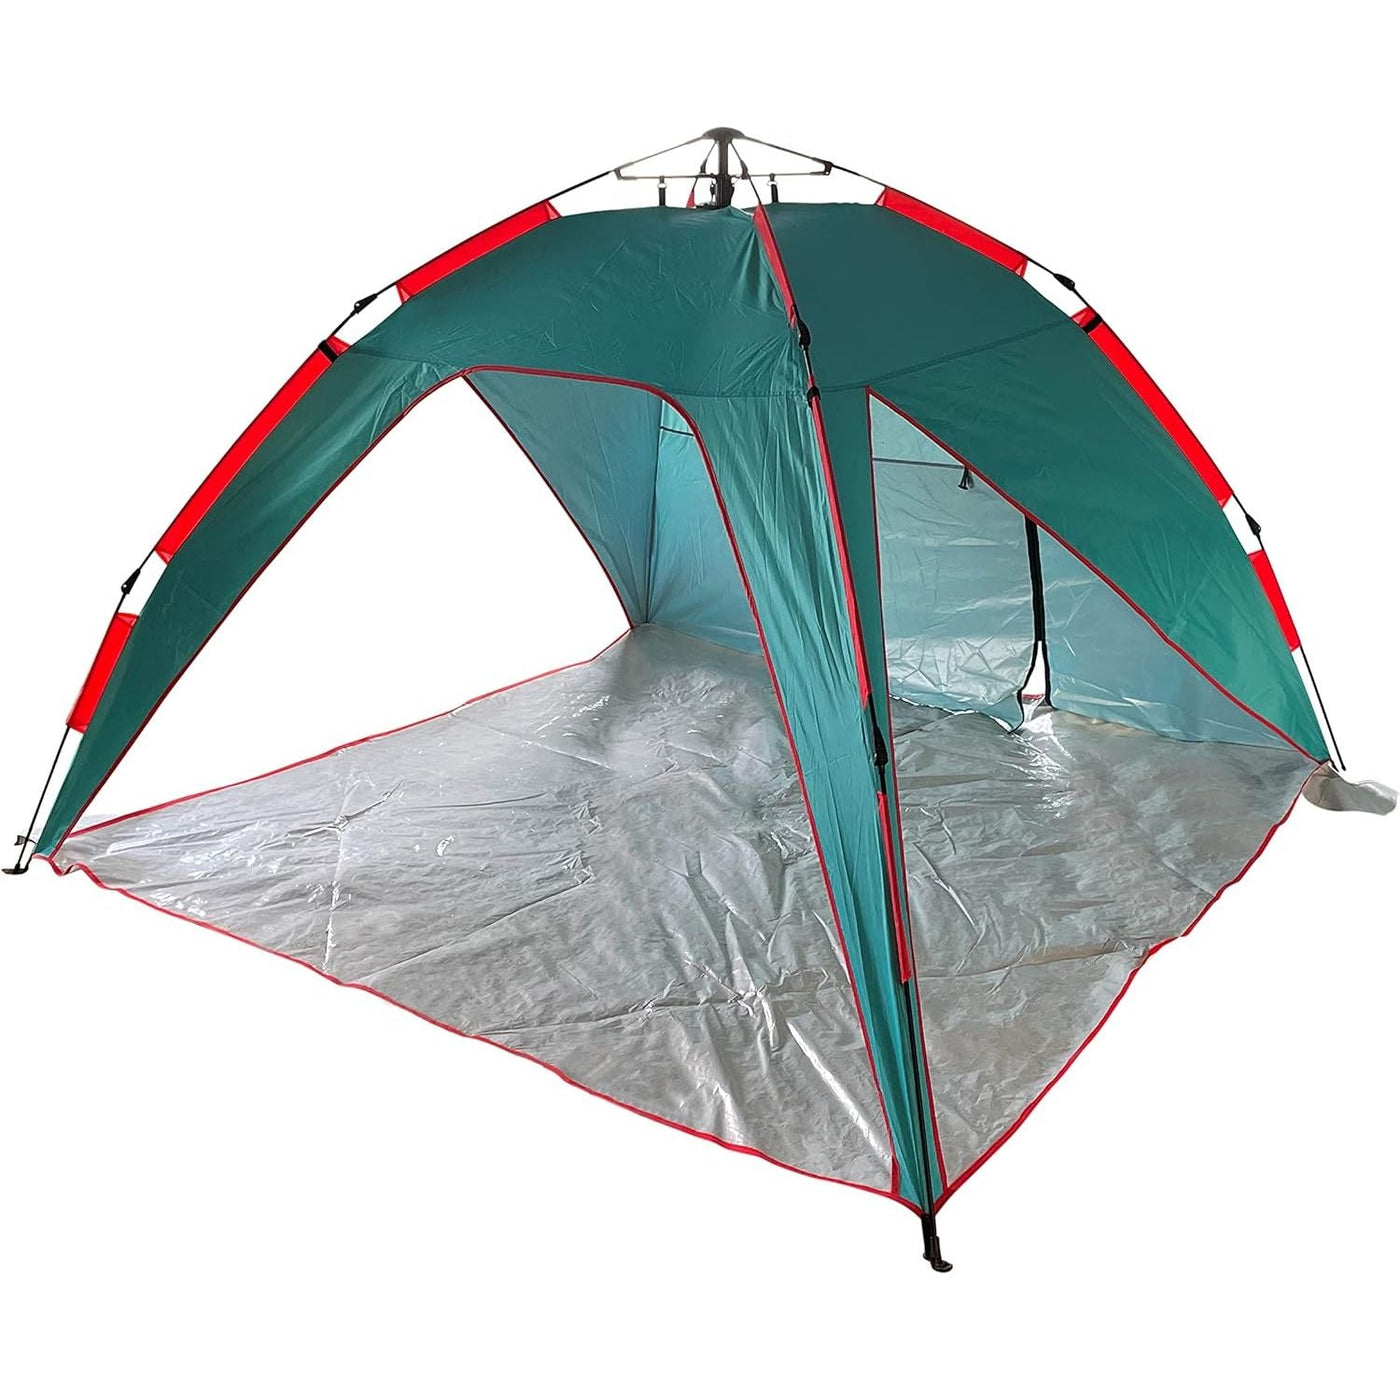 Bliss Hammocks BHT-A39-TO Pop-Up Beach Tent w/Carry Bag - Just Closeouts Canada Inc.